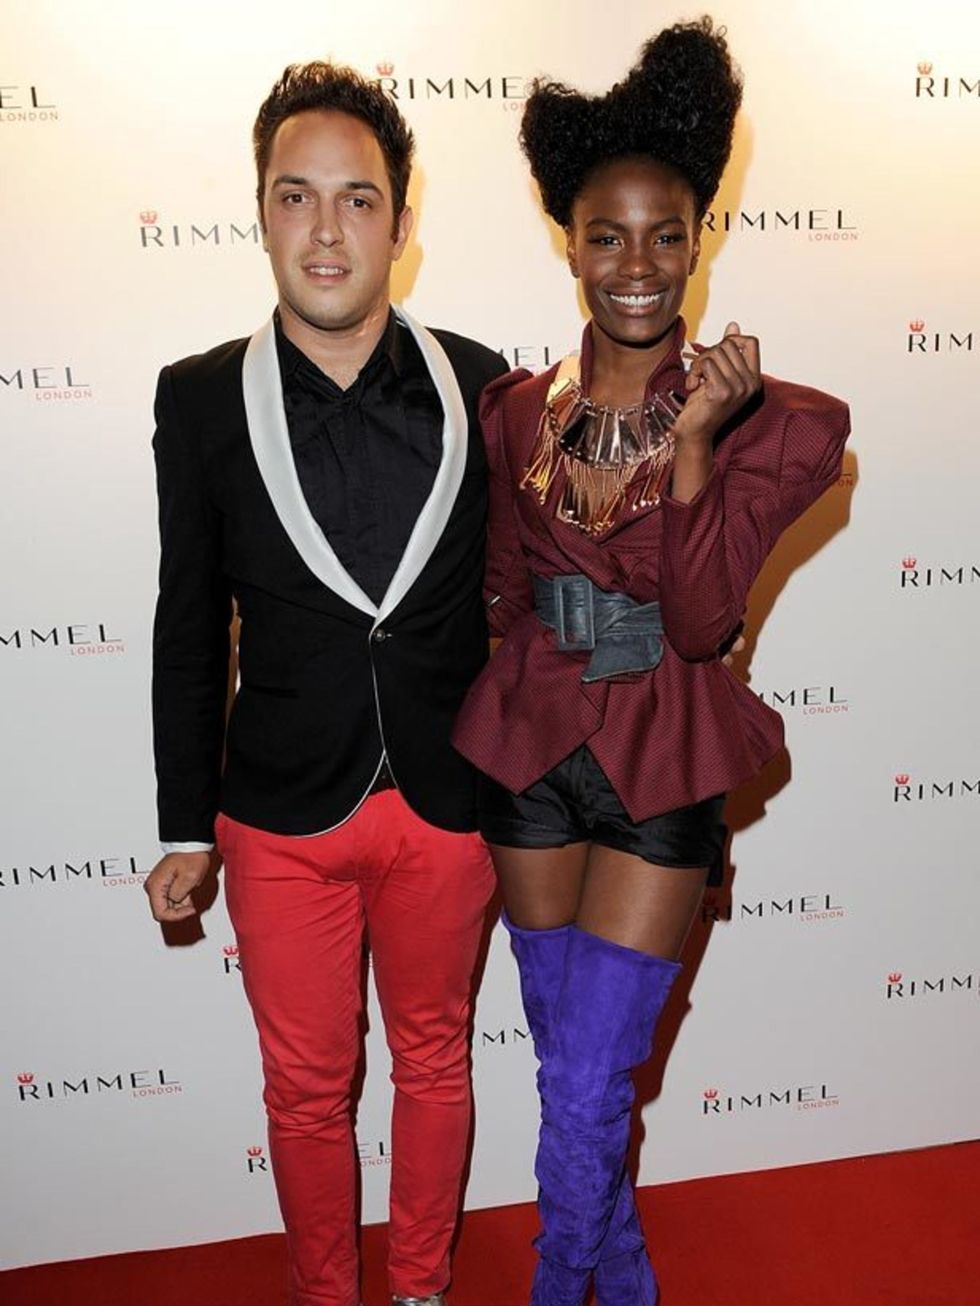 <p>Dan Smith &amp; The Noisettes <a href="http://www.elleuk.com/content/search?SearchText=Shingai+Shoniwa&amp;SearchButton=Search">Shingai Shoniwa</a> at the Rimmel &amp; <a href="http://www.elleuk.com/starstyle/style-files/(section)/Kate-Moss">Kate Moss<